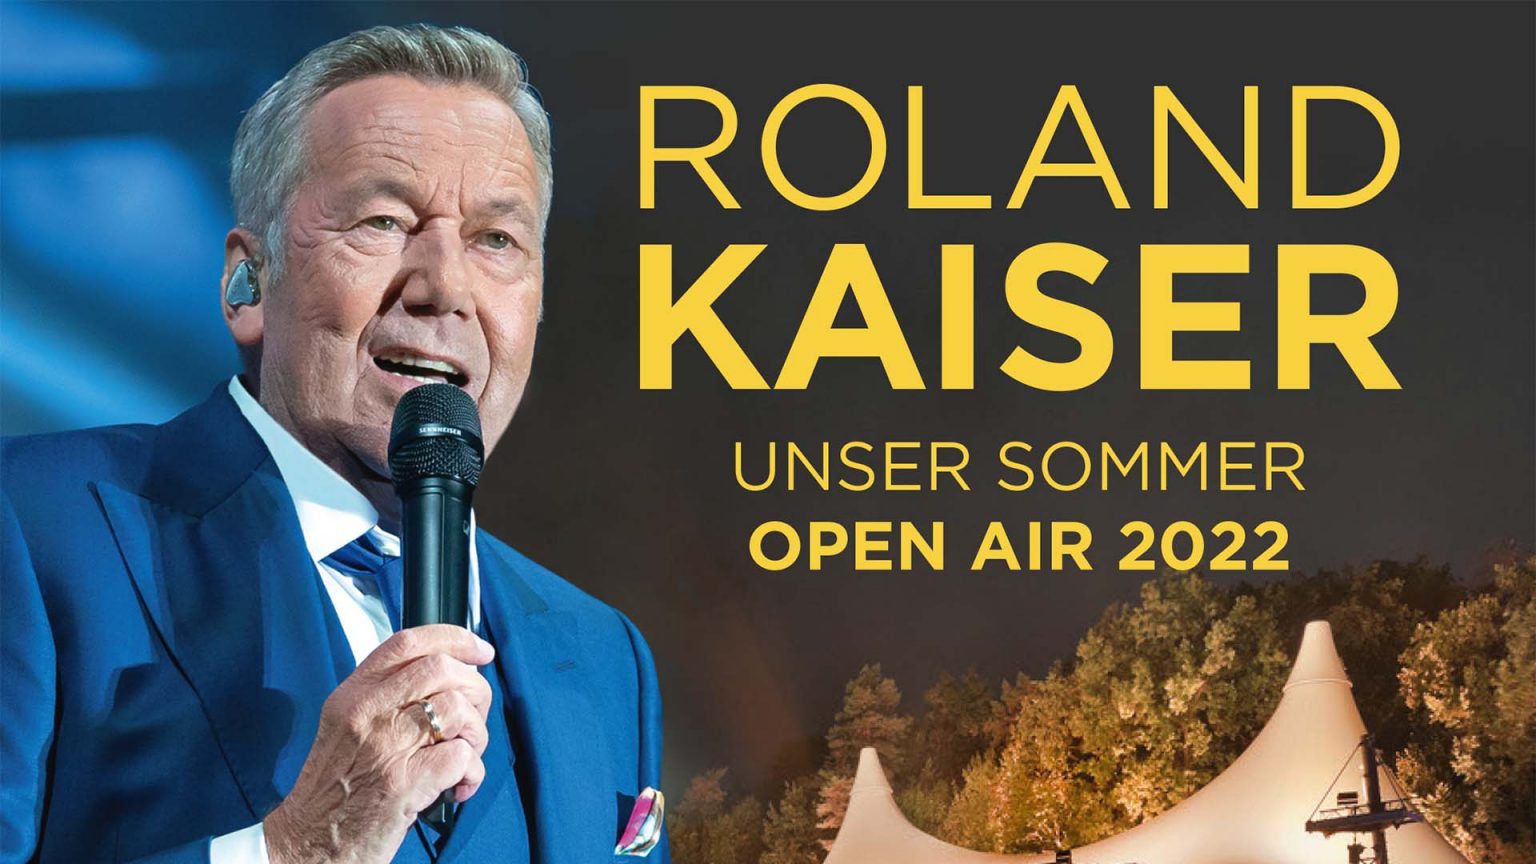 Roland Kaiser visits Willingen as part of his tour! MGNFY